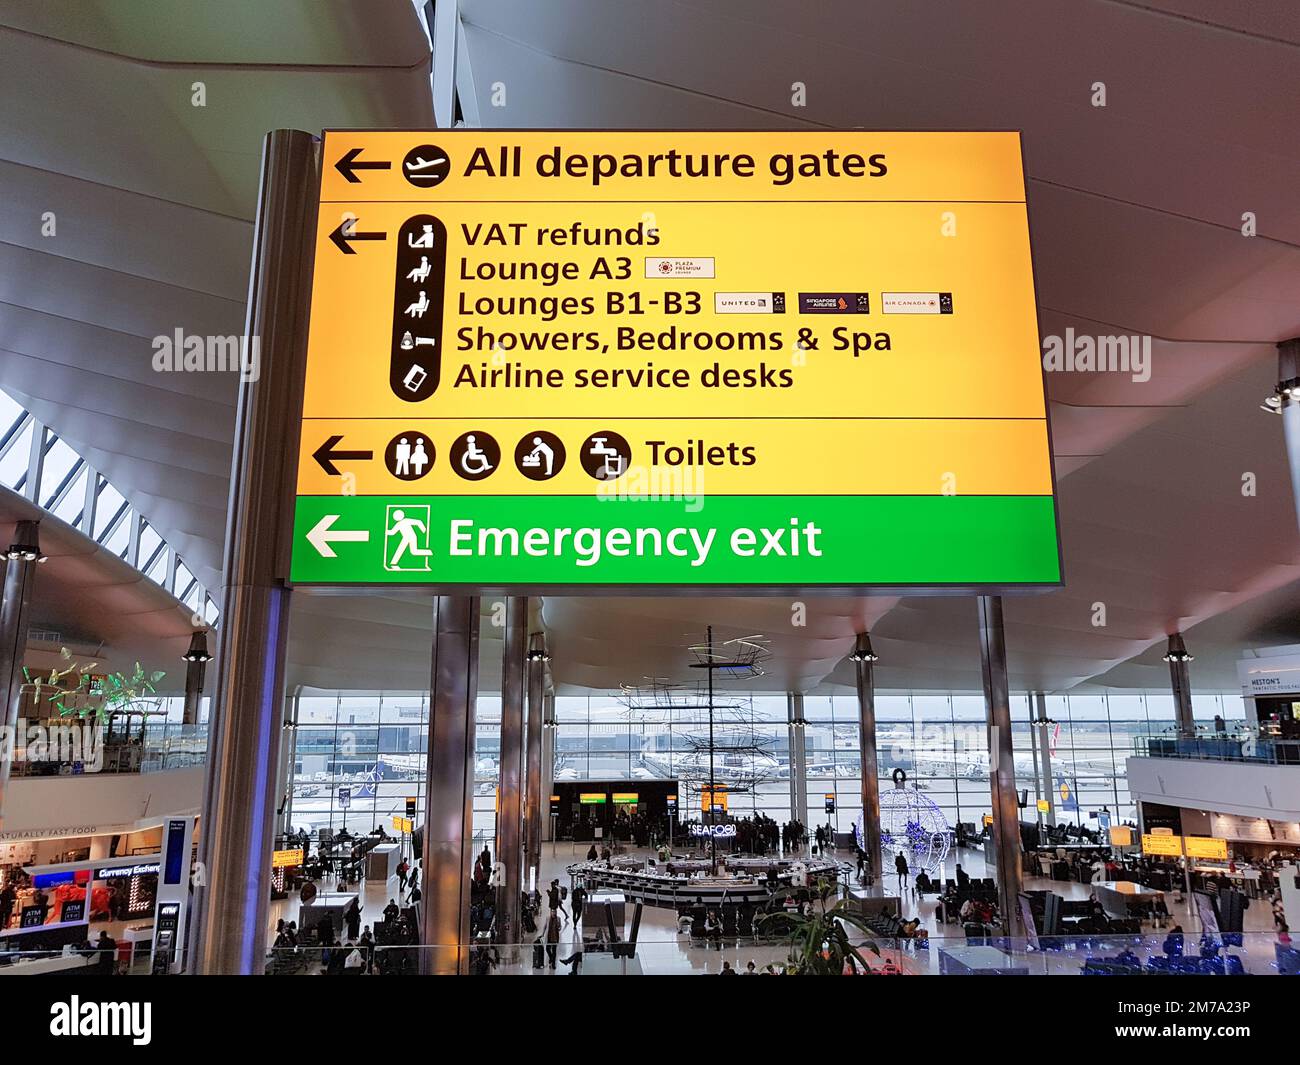 London, UK - December 2017 : Heathrow Airport Information signboard pointing to direction of departure gates, lounges, toilets, etc Stock Photo